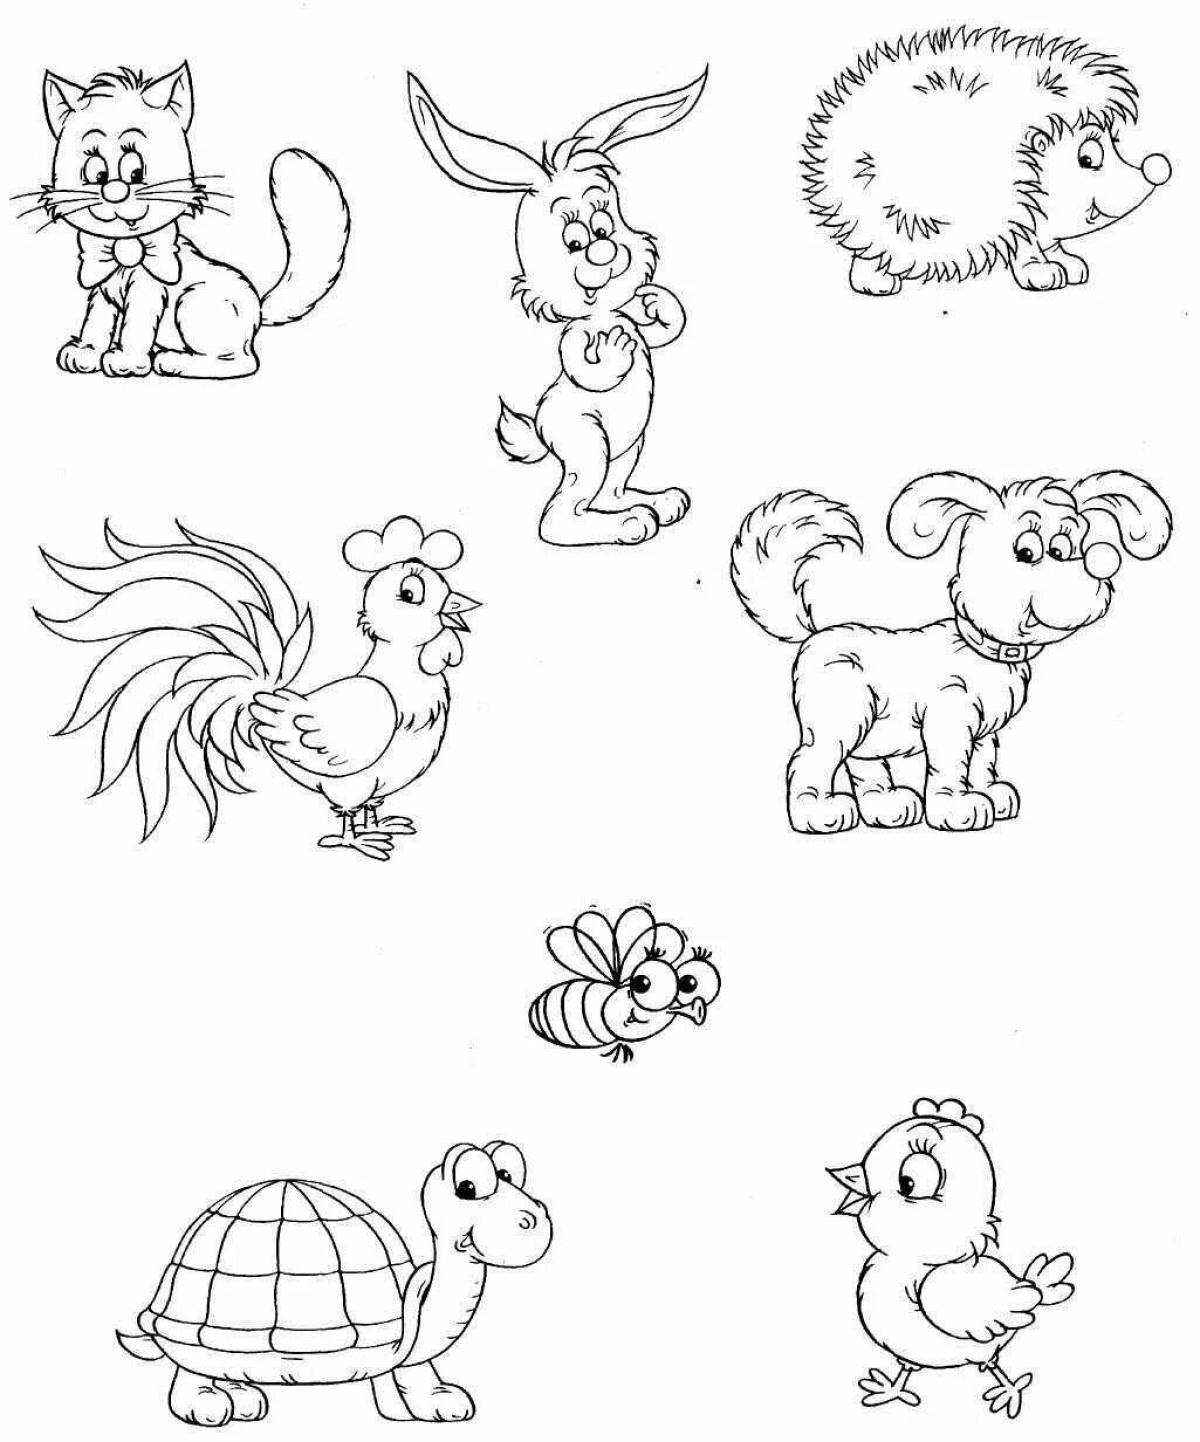 Witty little animals coloring book